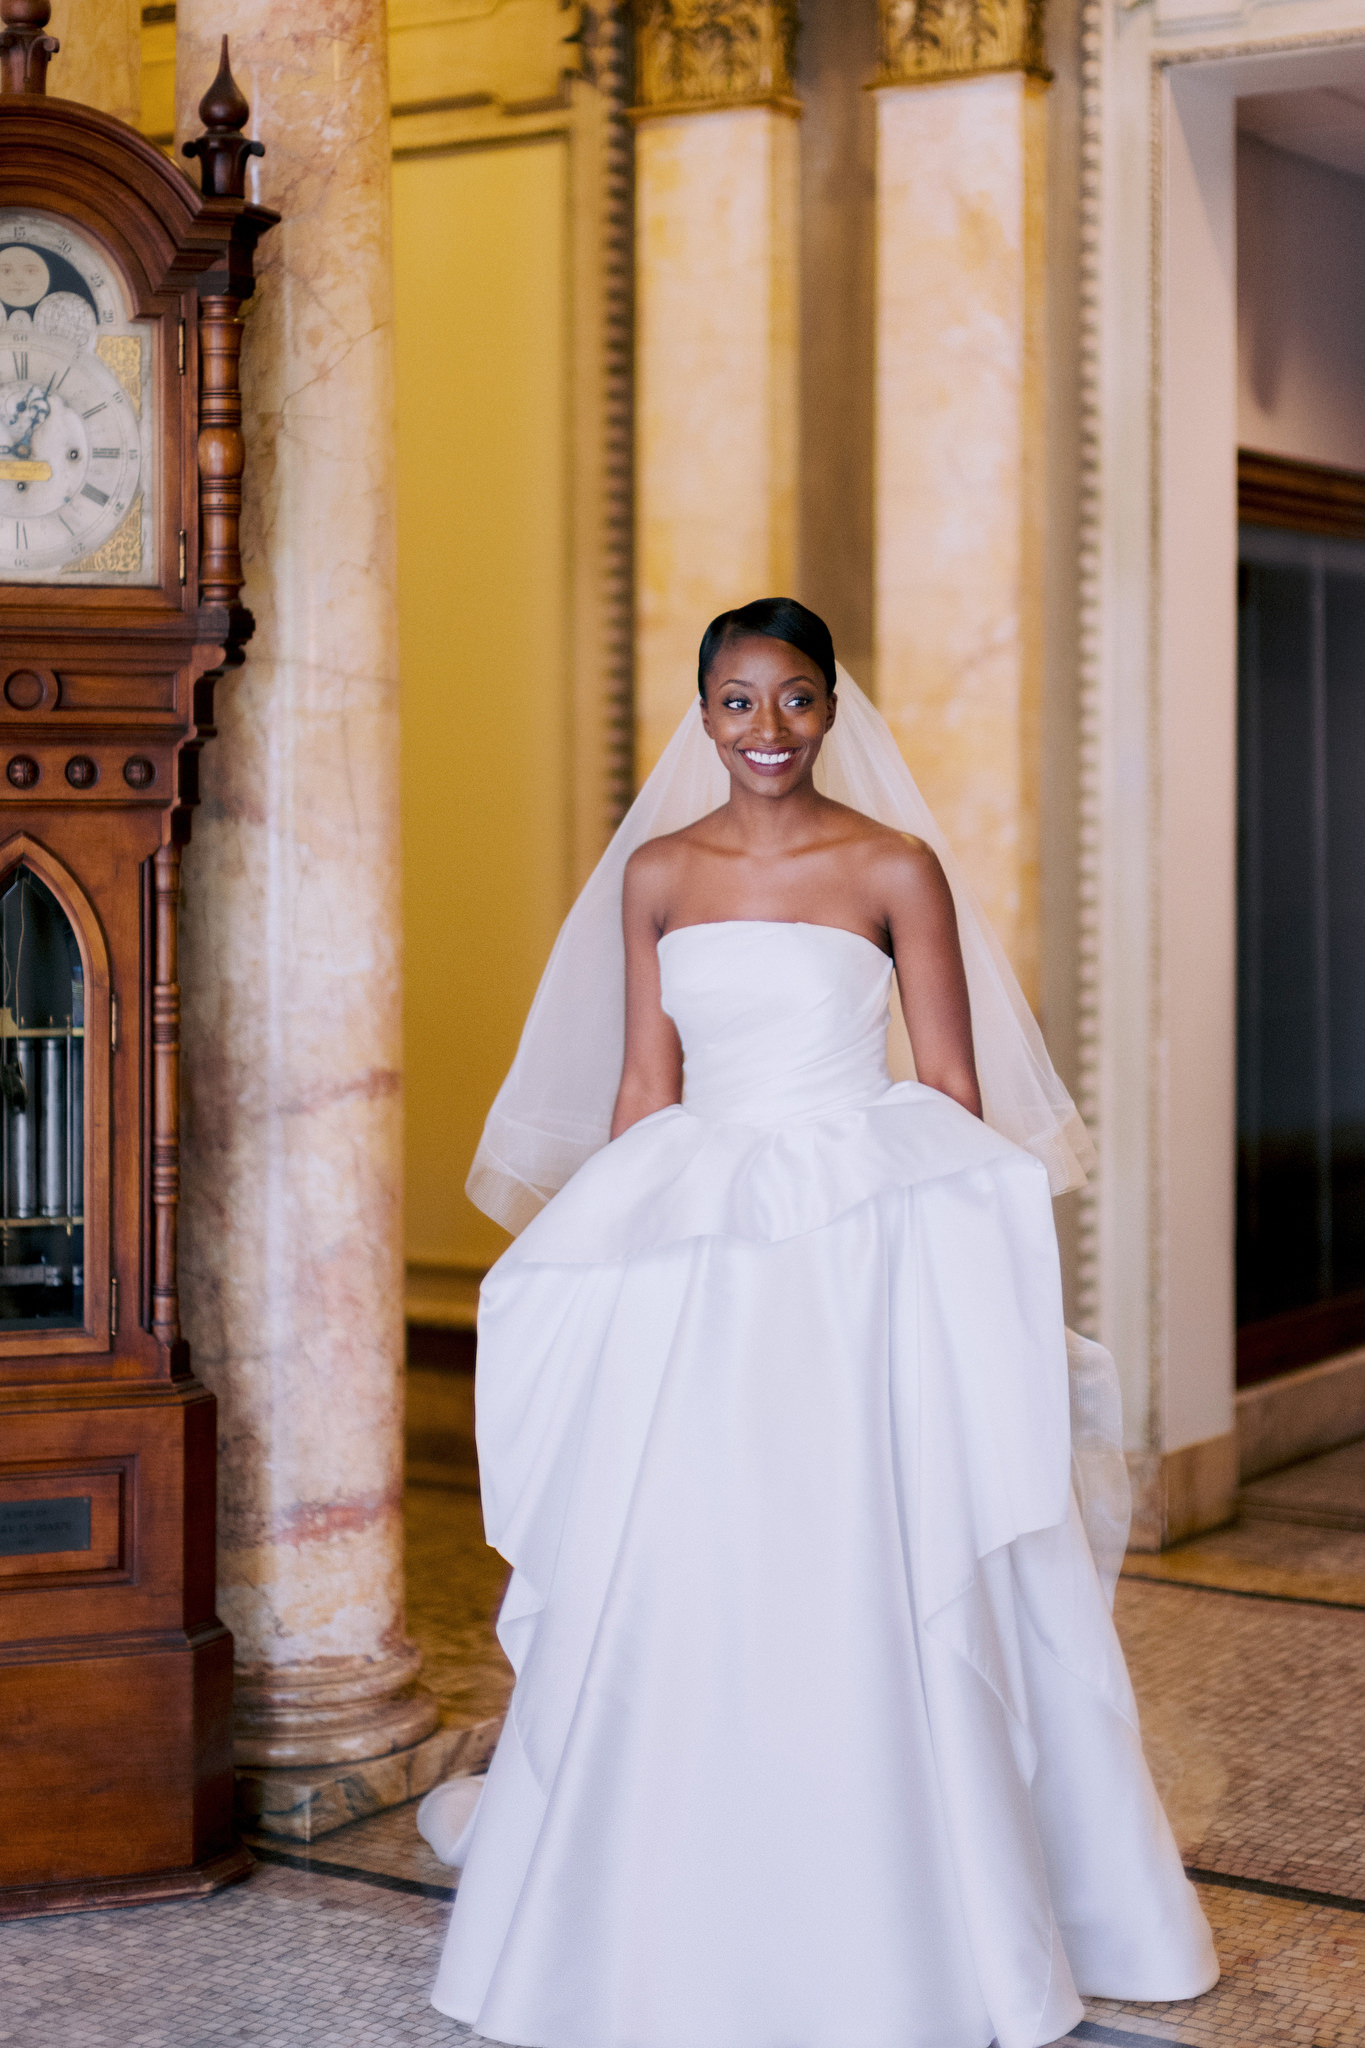 Bride wearing wedding dress standing by grandfather clock in Providence Public Library